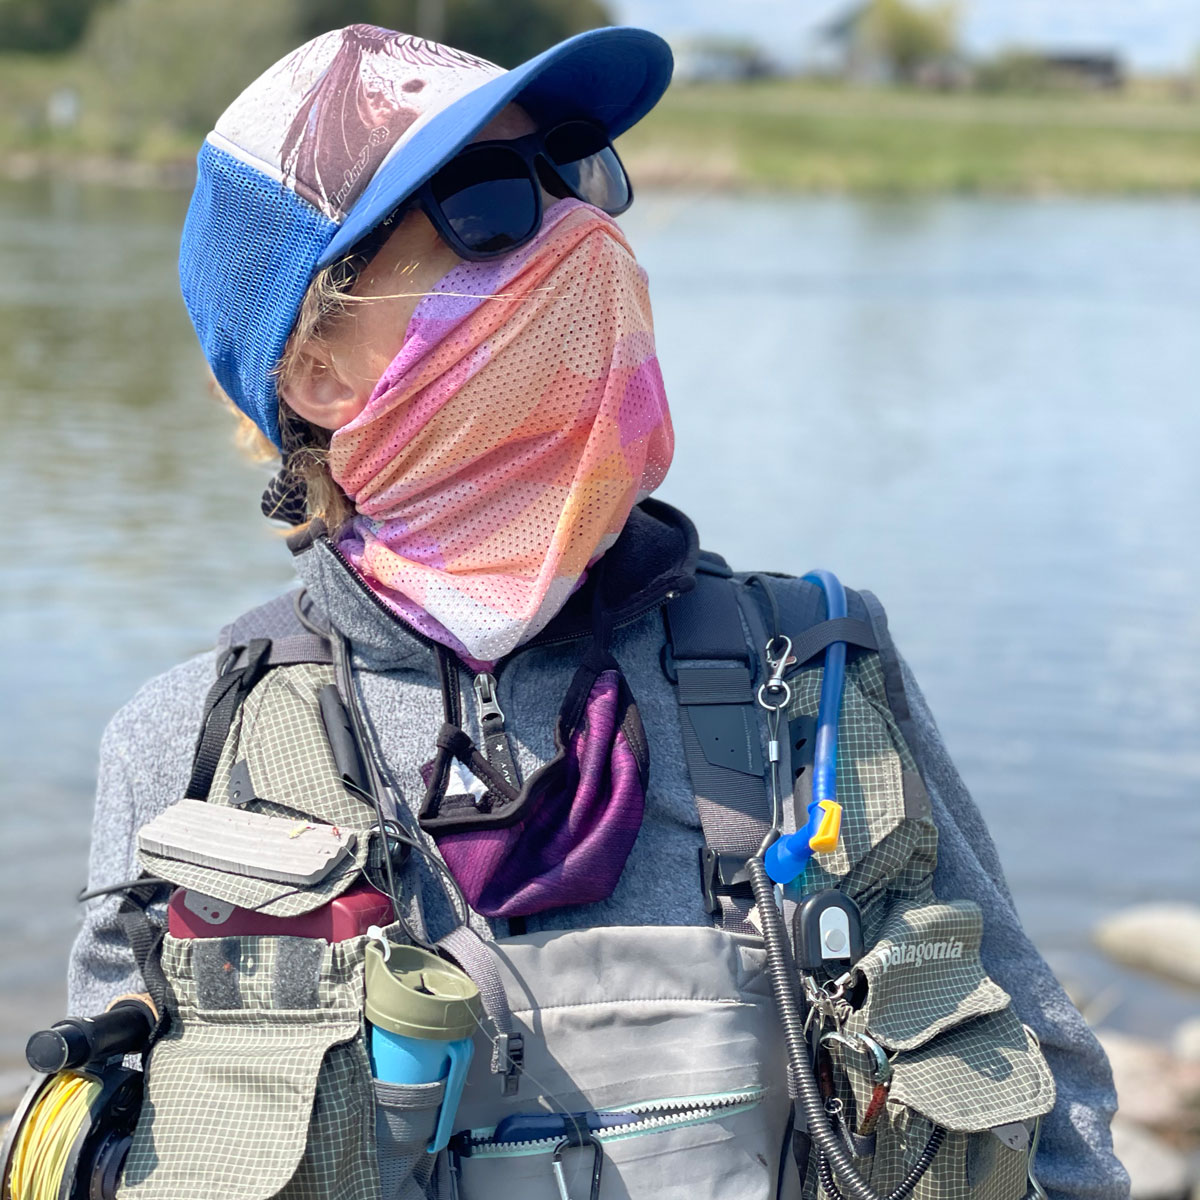 Avalon7 Neon Trout Mesh Sun Mask for flyfishing and hiking